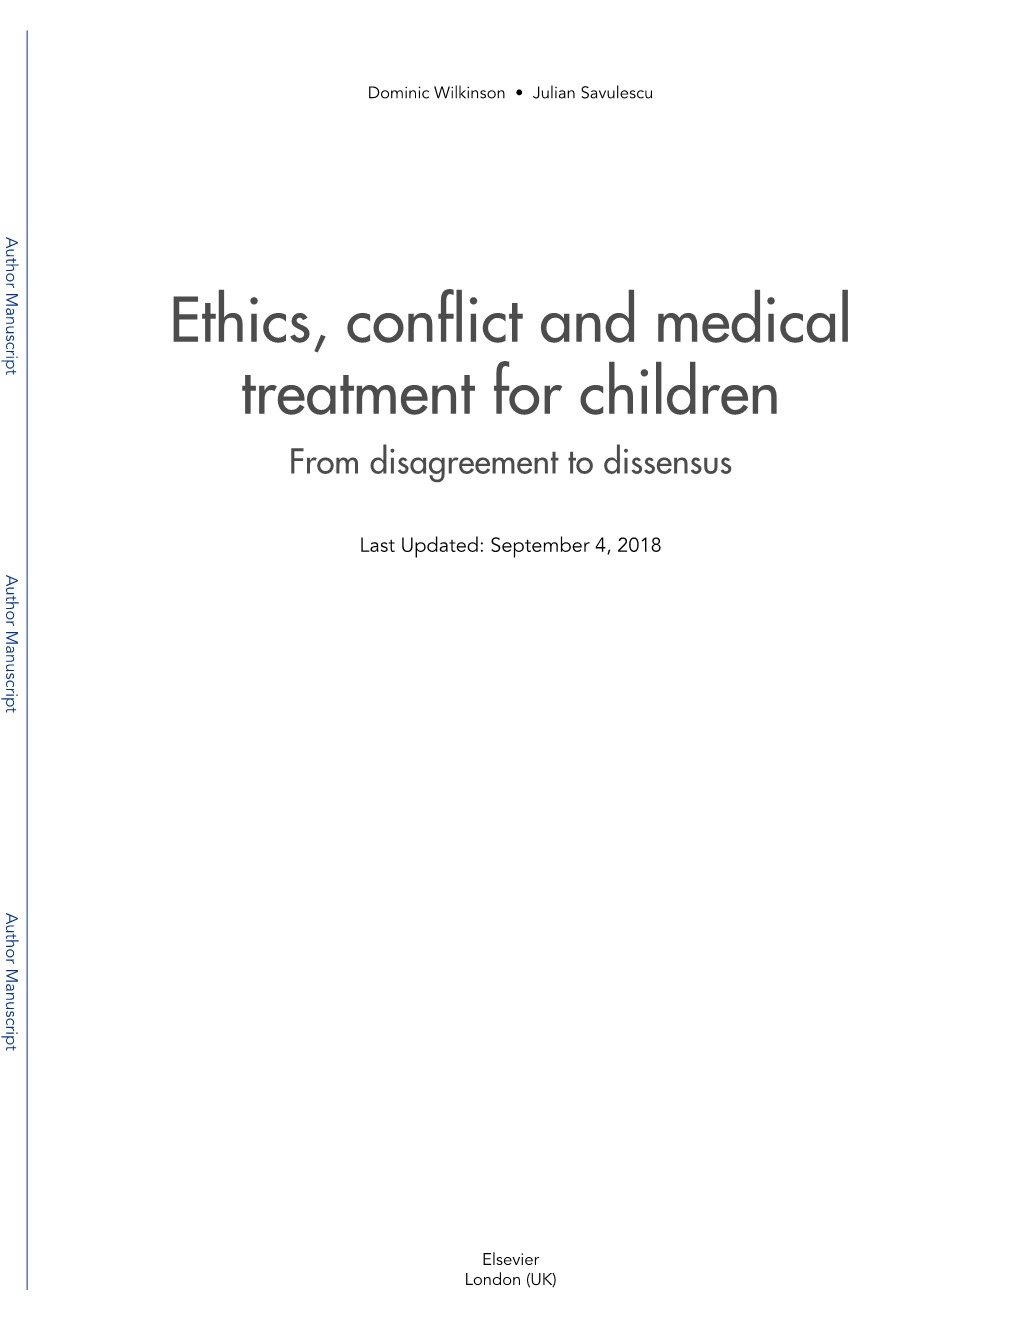 Ethics, Conflict and Medical Treatment for Children from Disagreement to Dissensus